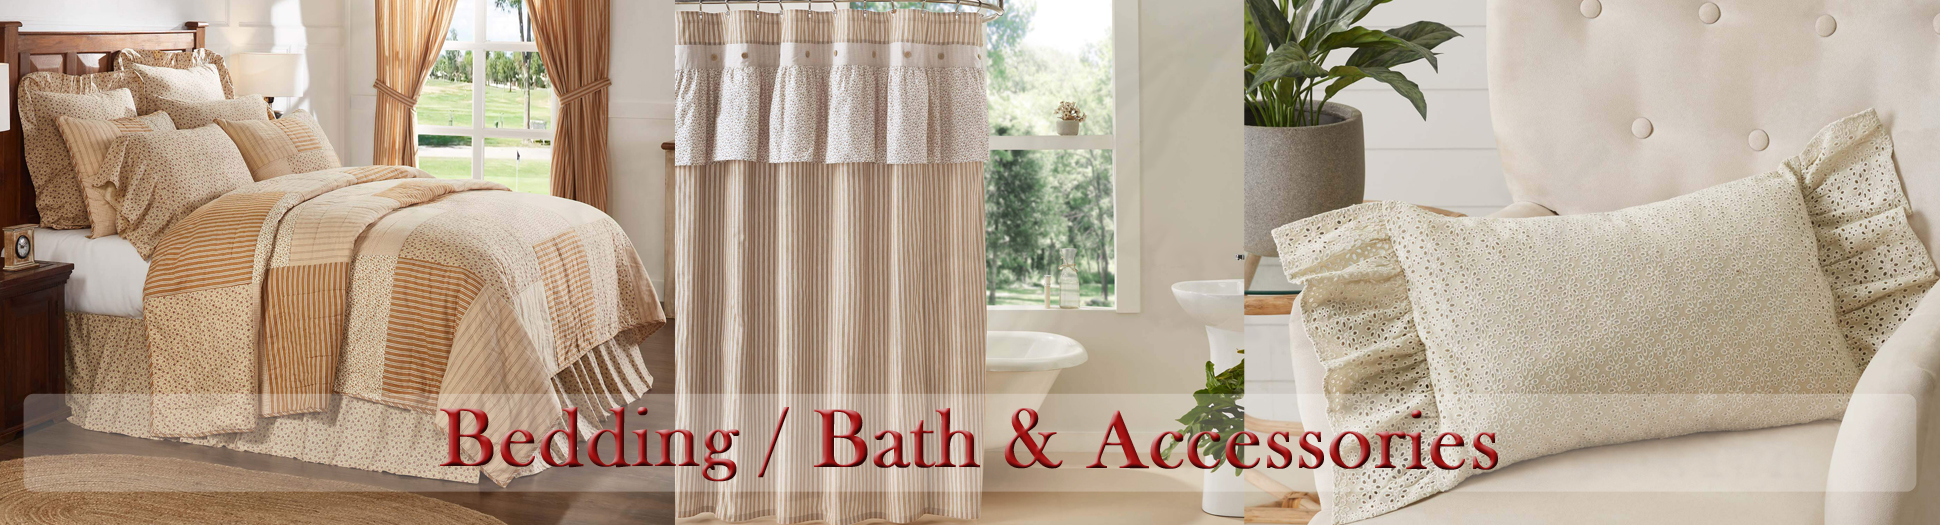 Quilts, Bedding Accessories And Bath By VHC Brands